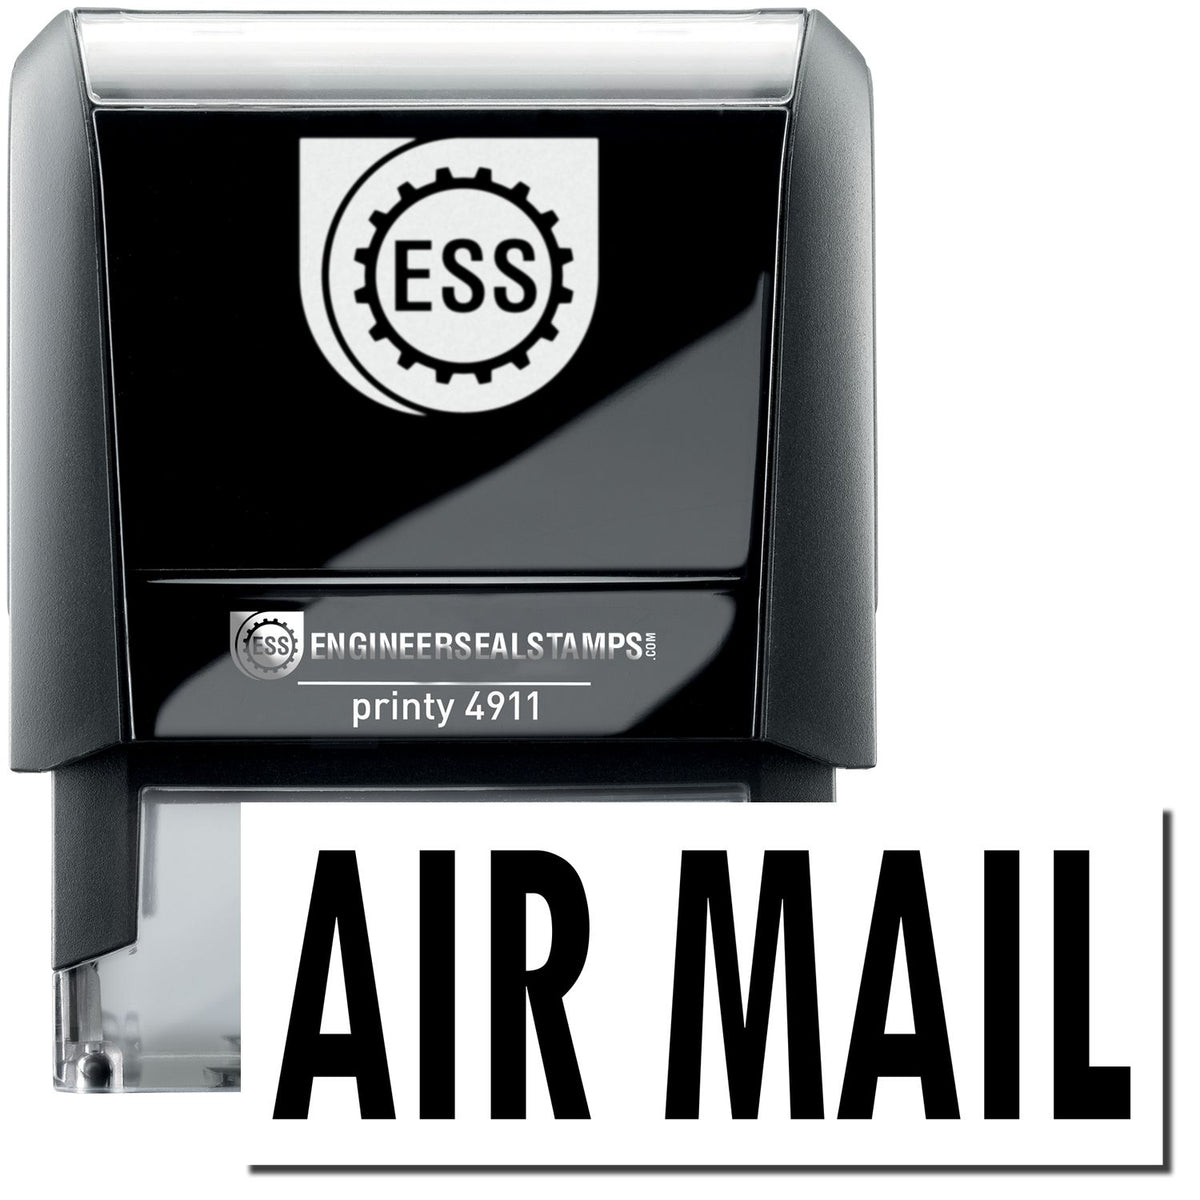 A self-inking stamp with a stamped image showing how the text &quot;AIR MAIL&quot; is displayed after stamping.